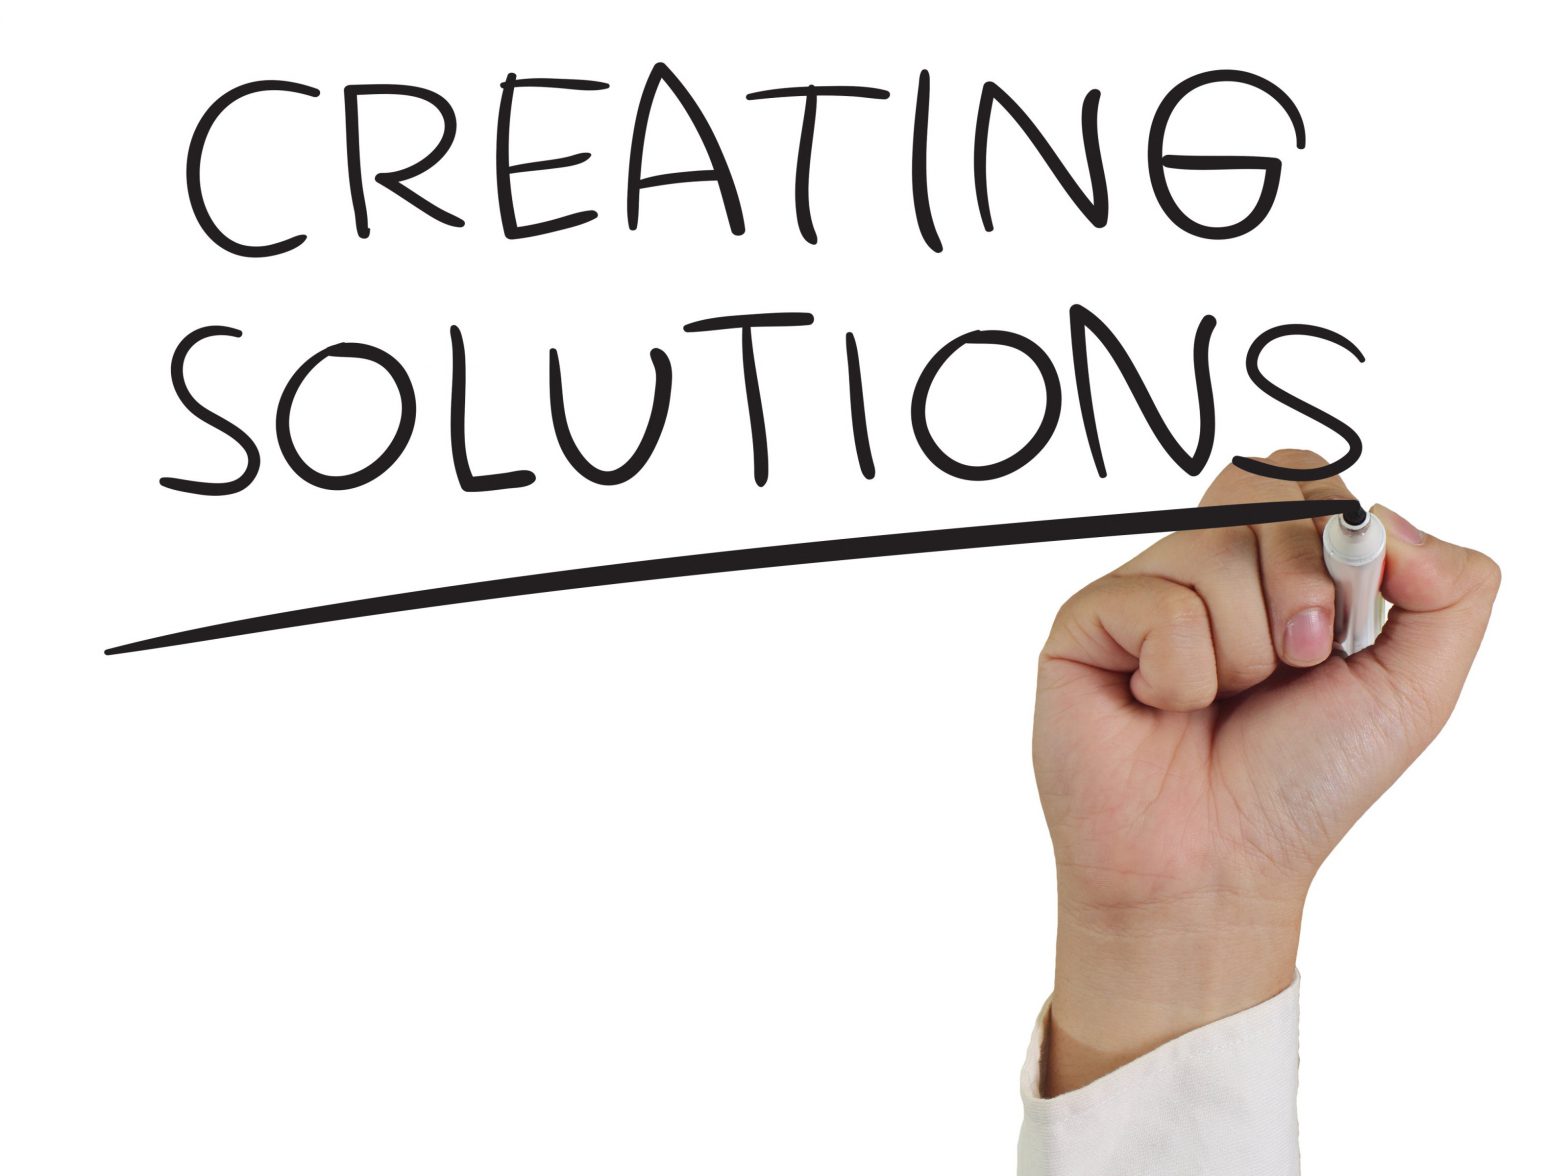 Photo of a hand drawing "creating solutions" in the image